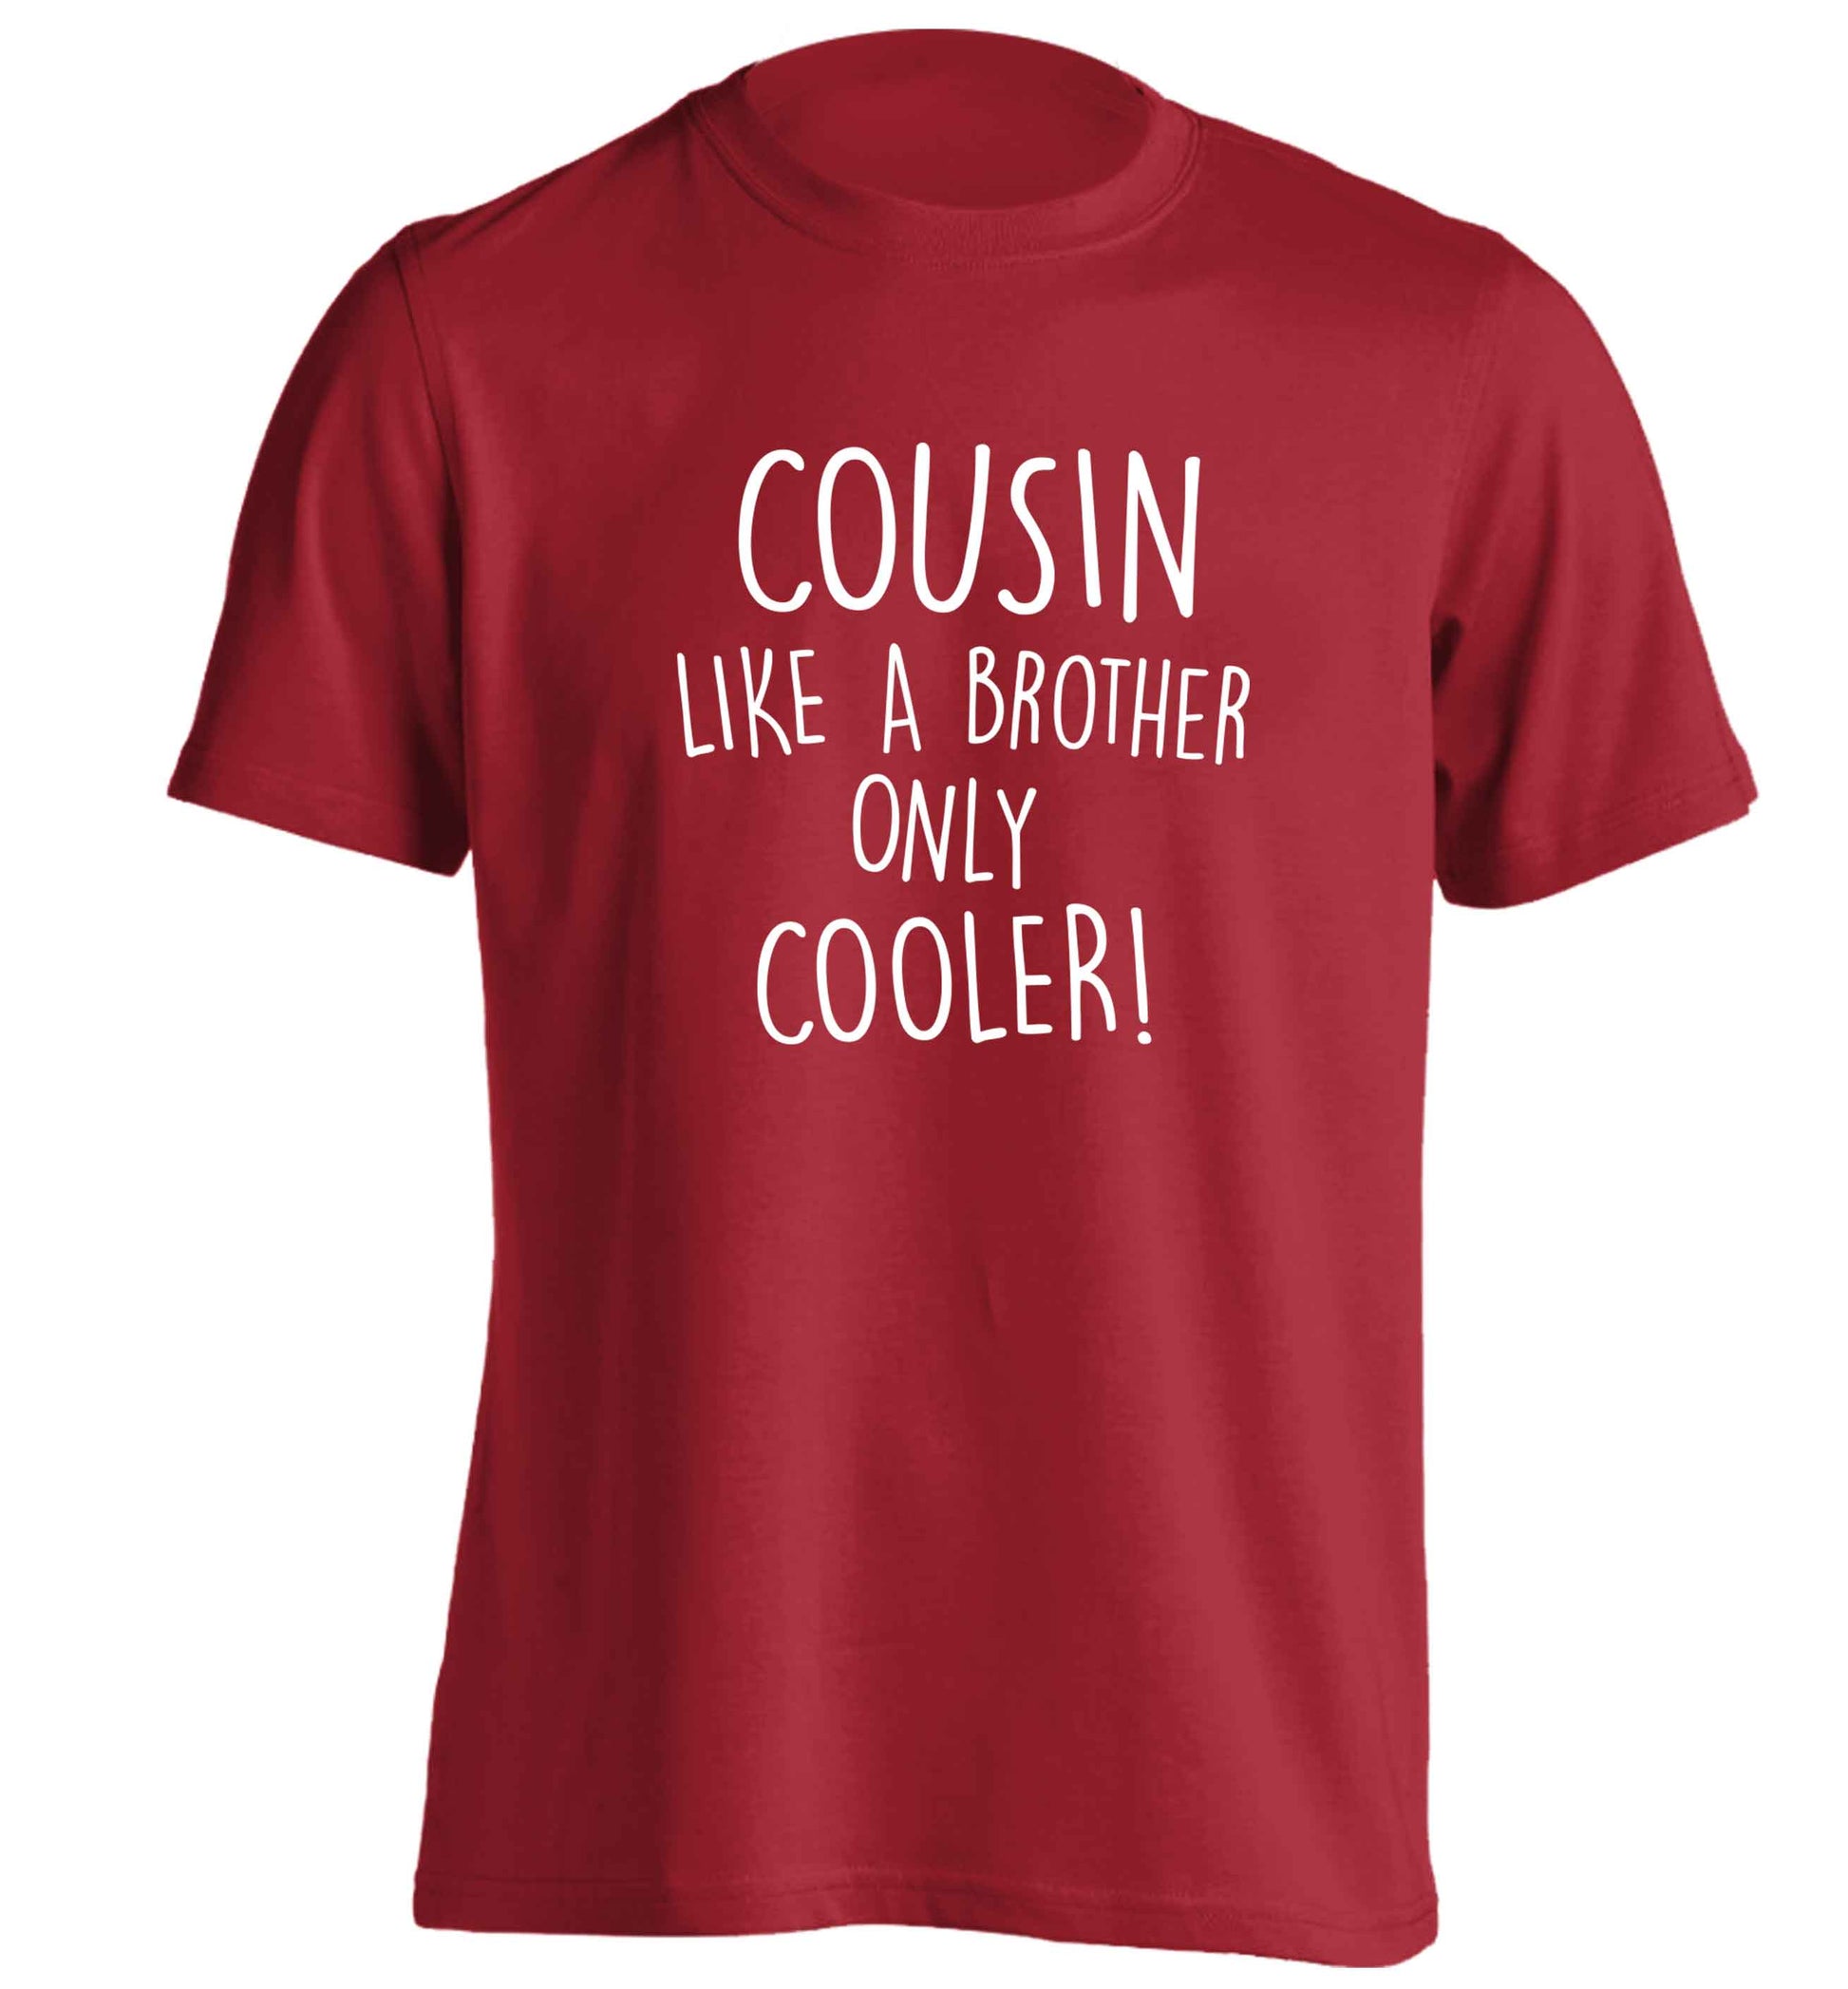 Cousin like a brother only cooler adults unisex red Tshirt 2XL